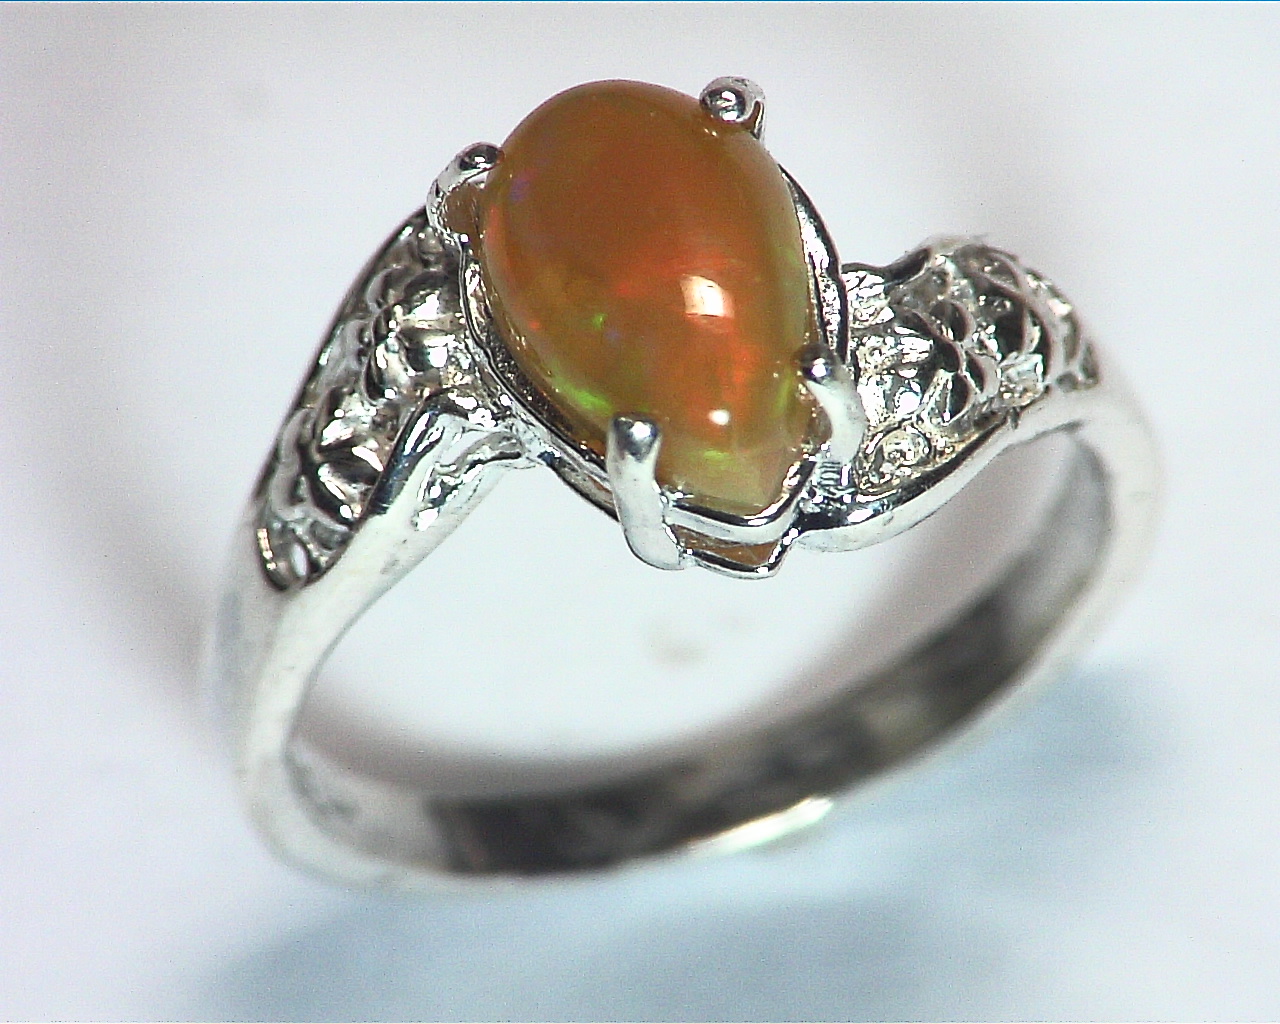 Opal (Mexican) Genuine Gemstone in Sterling silver Ring RSS,600 5